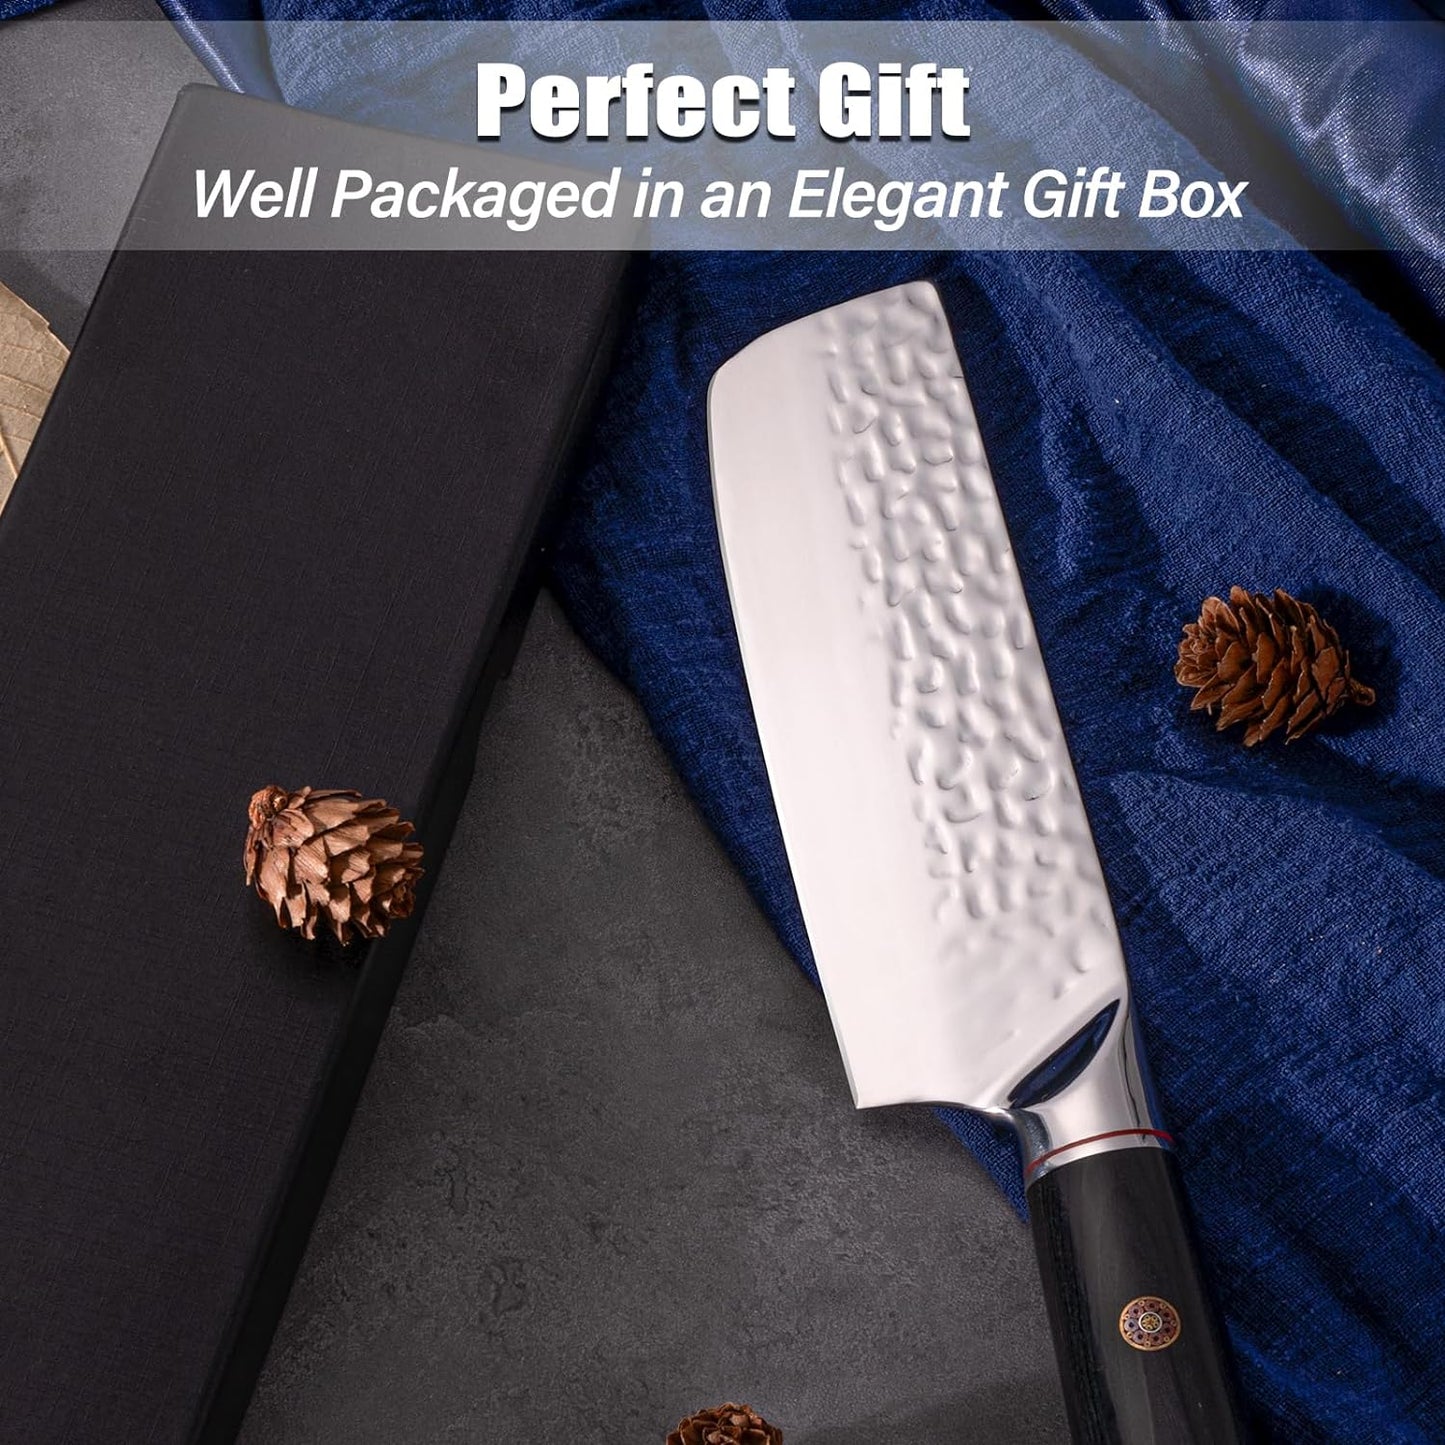 KD Japanese Nakiri Cleaver Knife Hand Forged Chef Knife with Gift Box